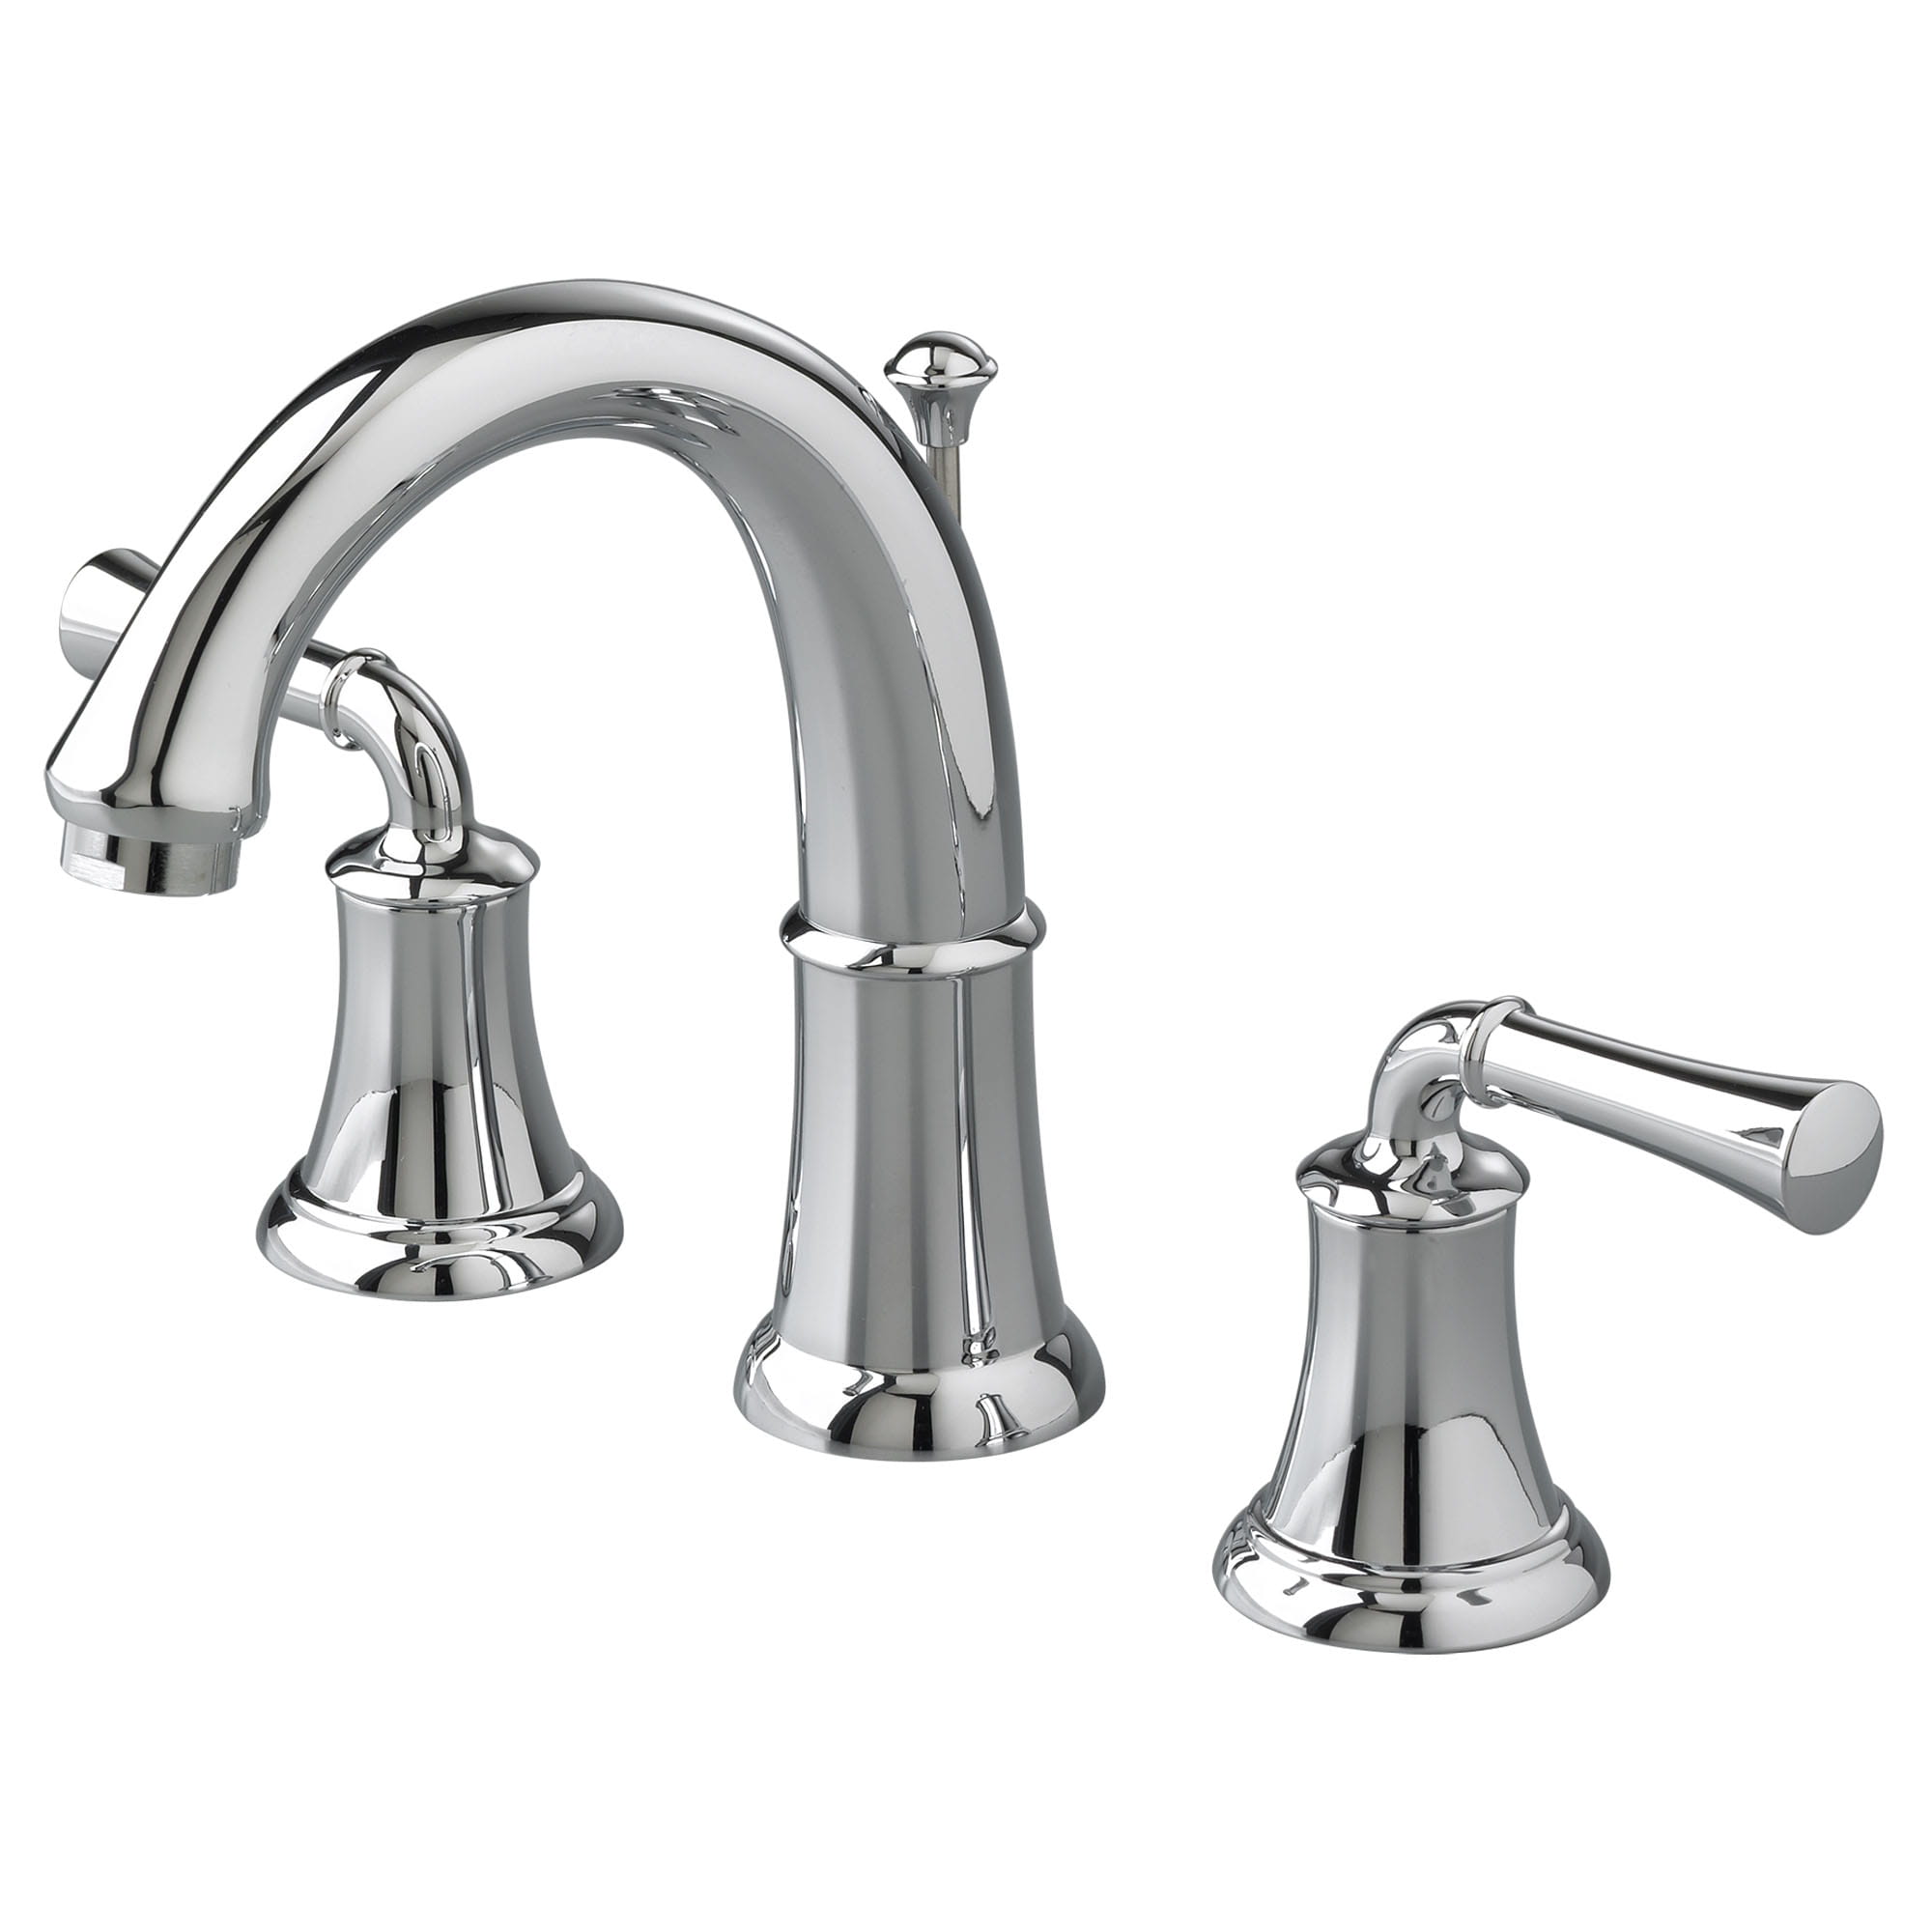 Portsmouth 8 In Widespread 2 Handle Crescent Spout Bathroom Faucet 12 GPM with Lever Handles CHROME